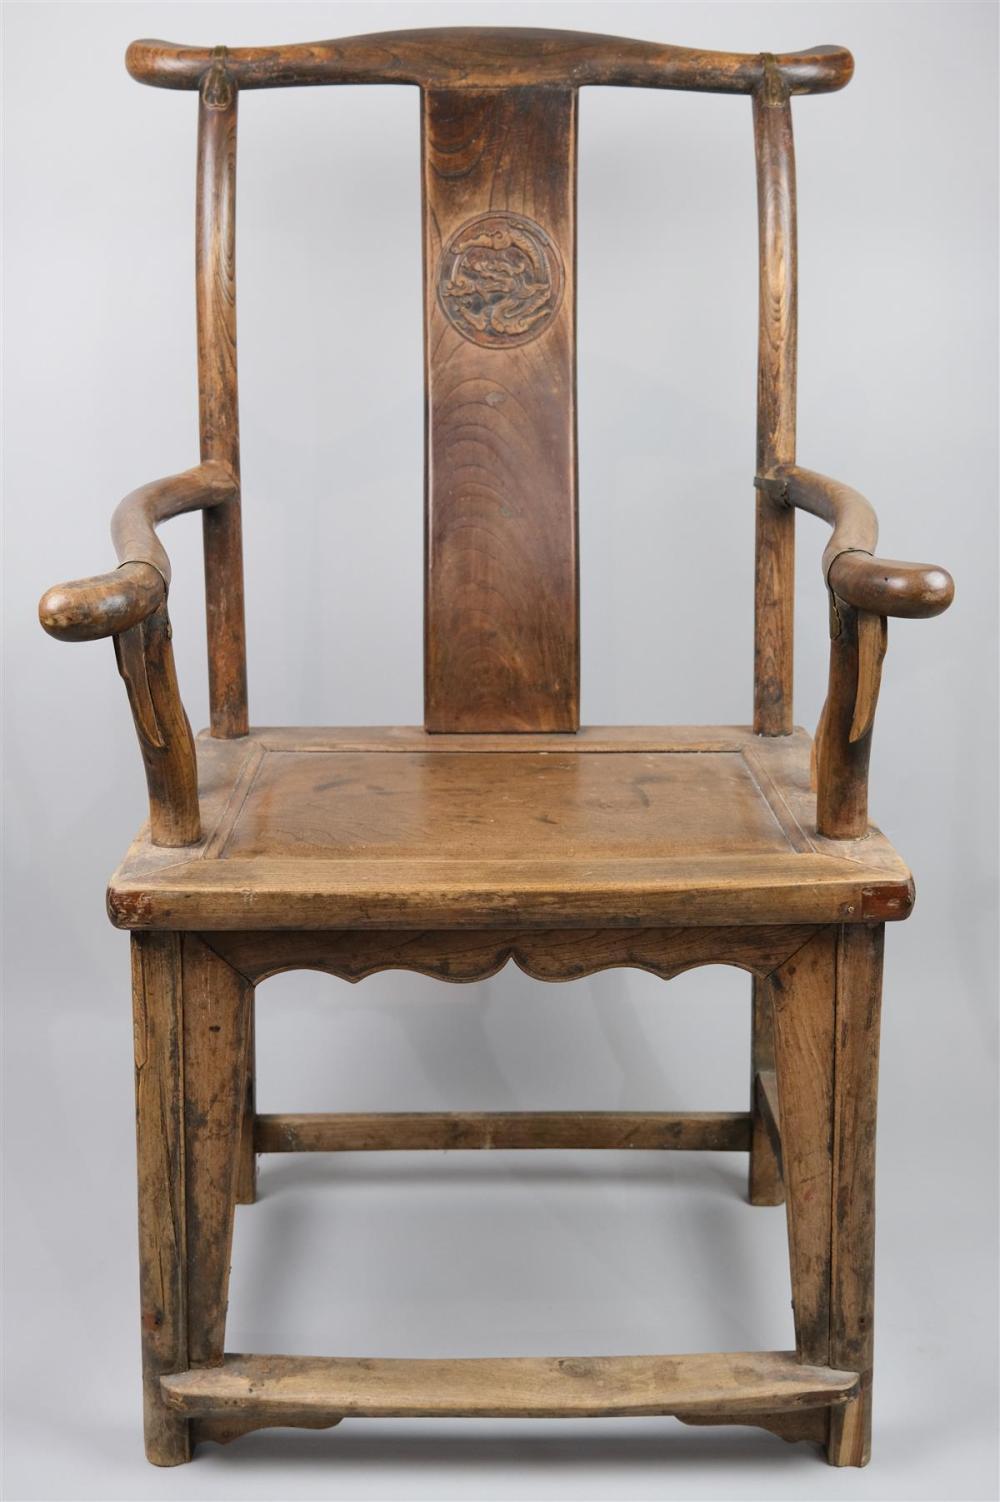 CHINESE ELM SCHOLAR'S CHAIRCHINESE